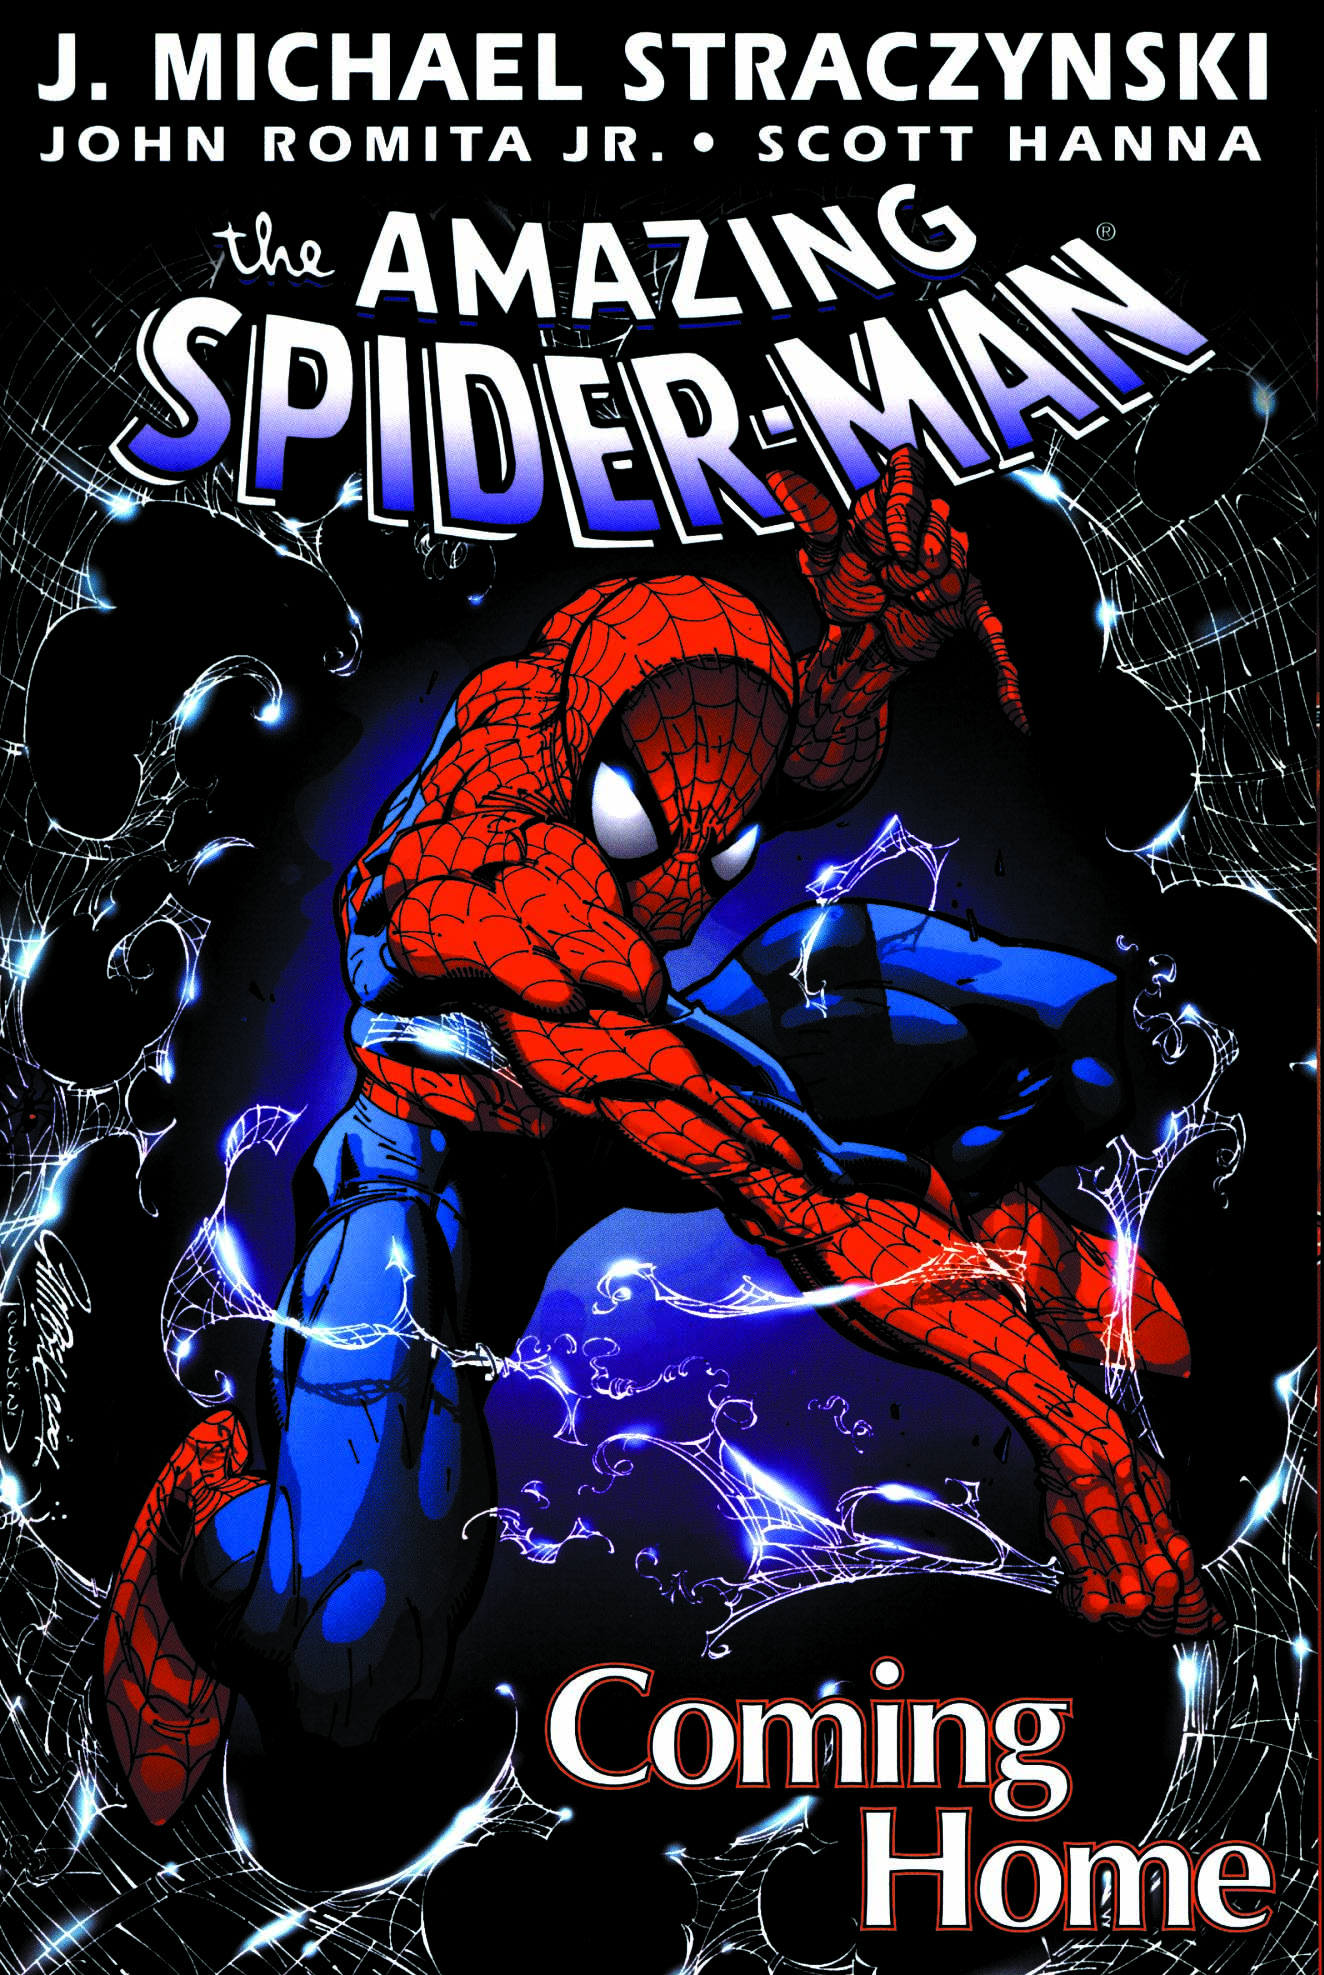 AMAZING SPIDER-MAN VOL. 1: COMING HOME (Trade Paperback)